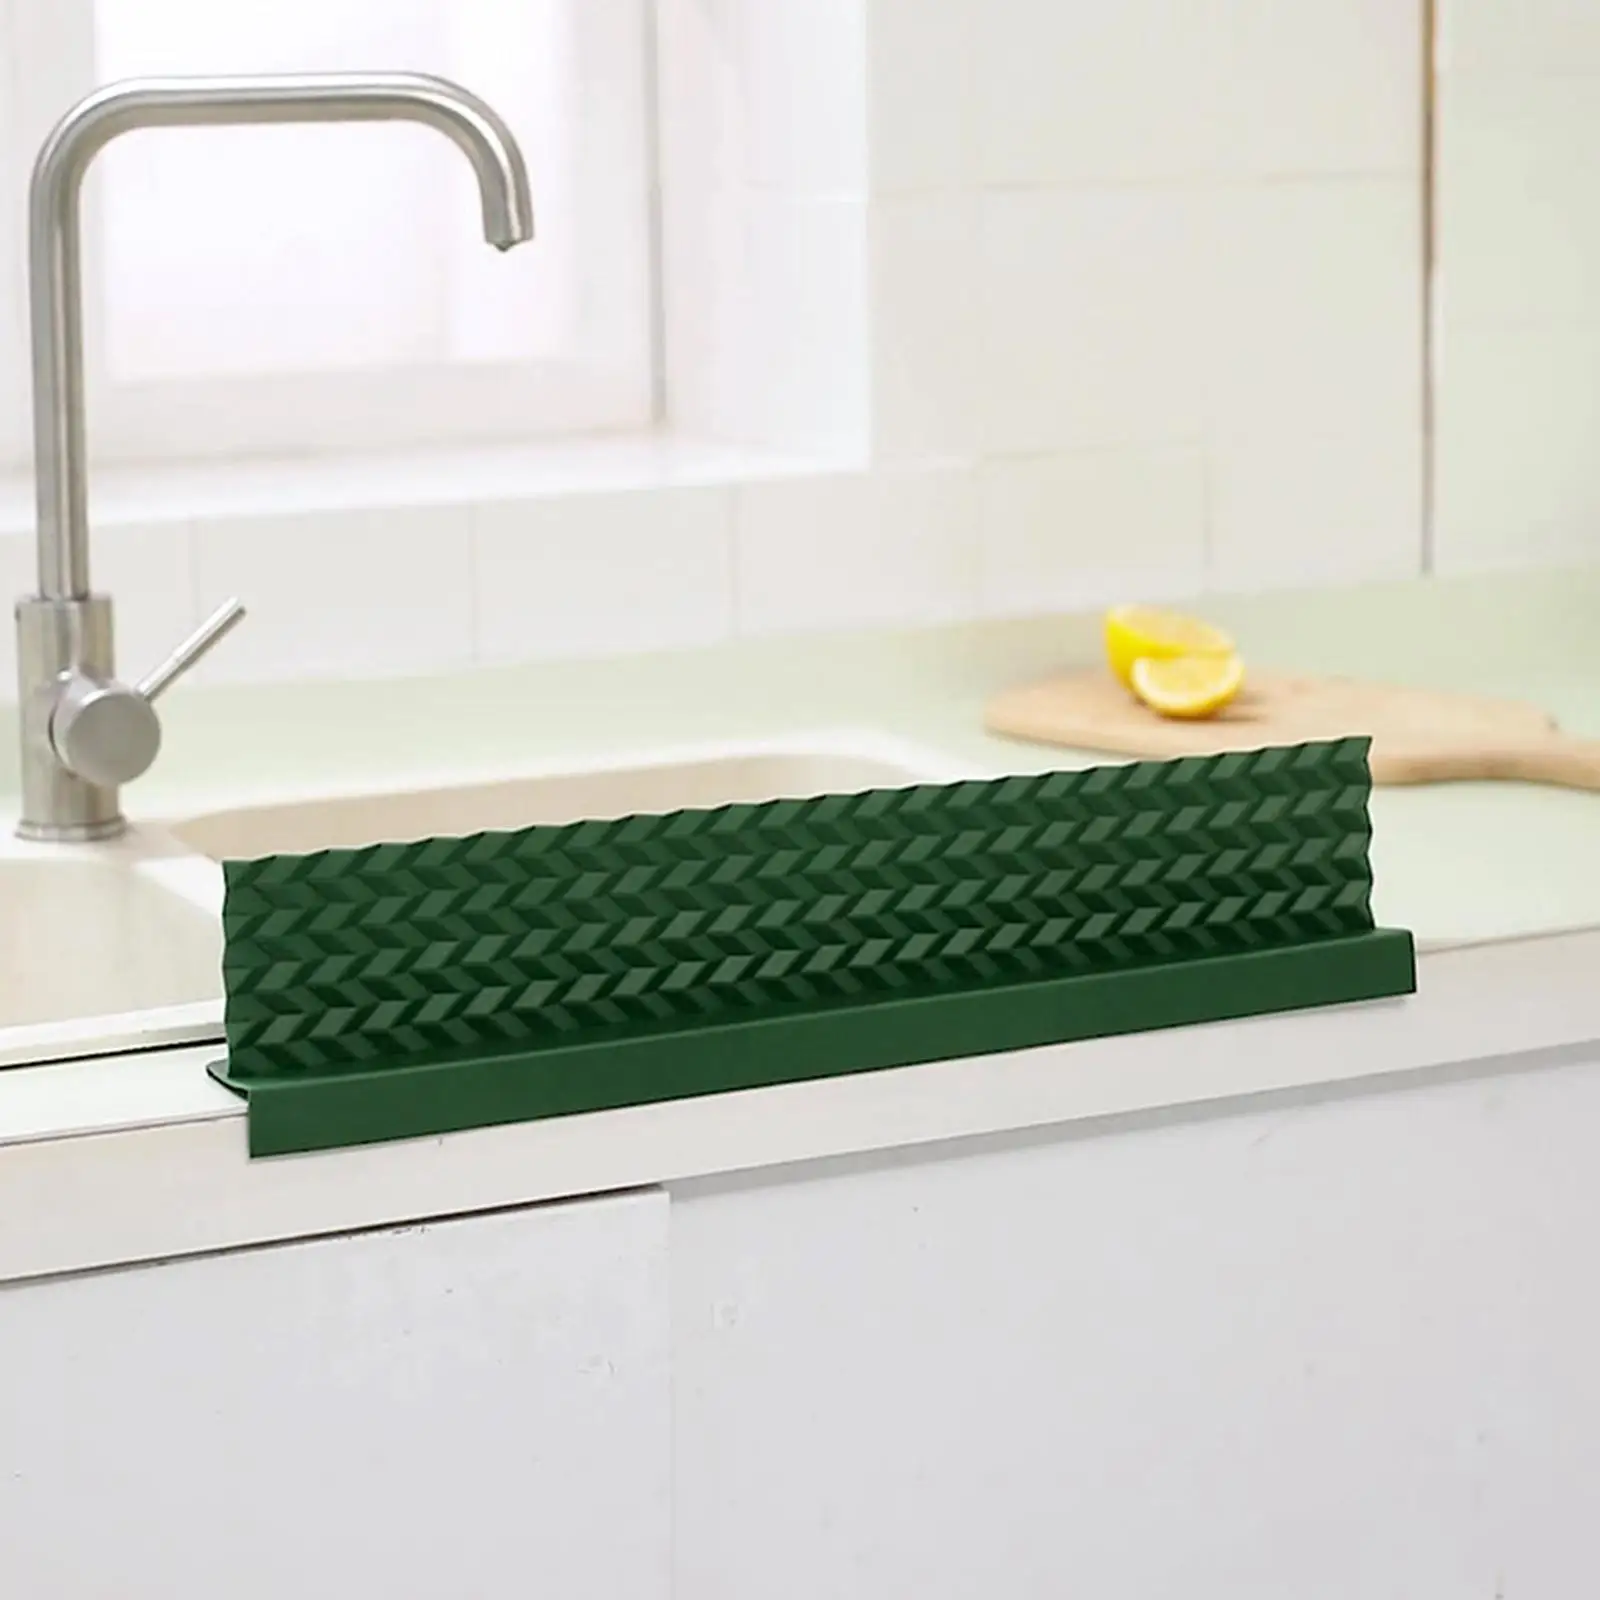 Sink Splash Guard Sink Water Guard Board with Suction Cup for Home, Washbasin, Dish Washing Tub Accessory